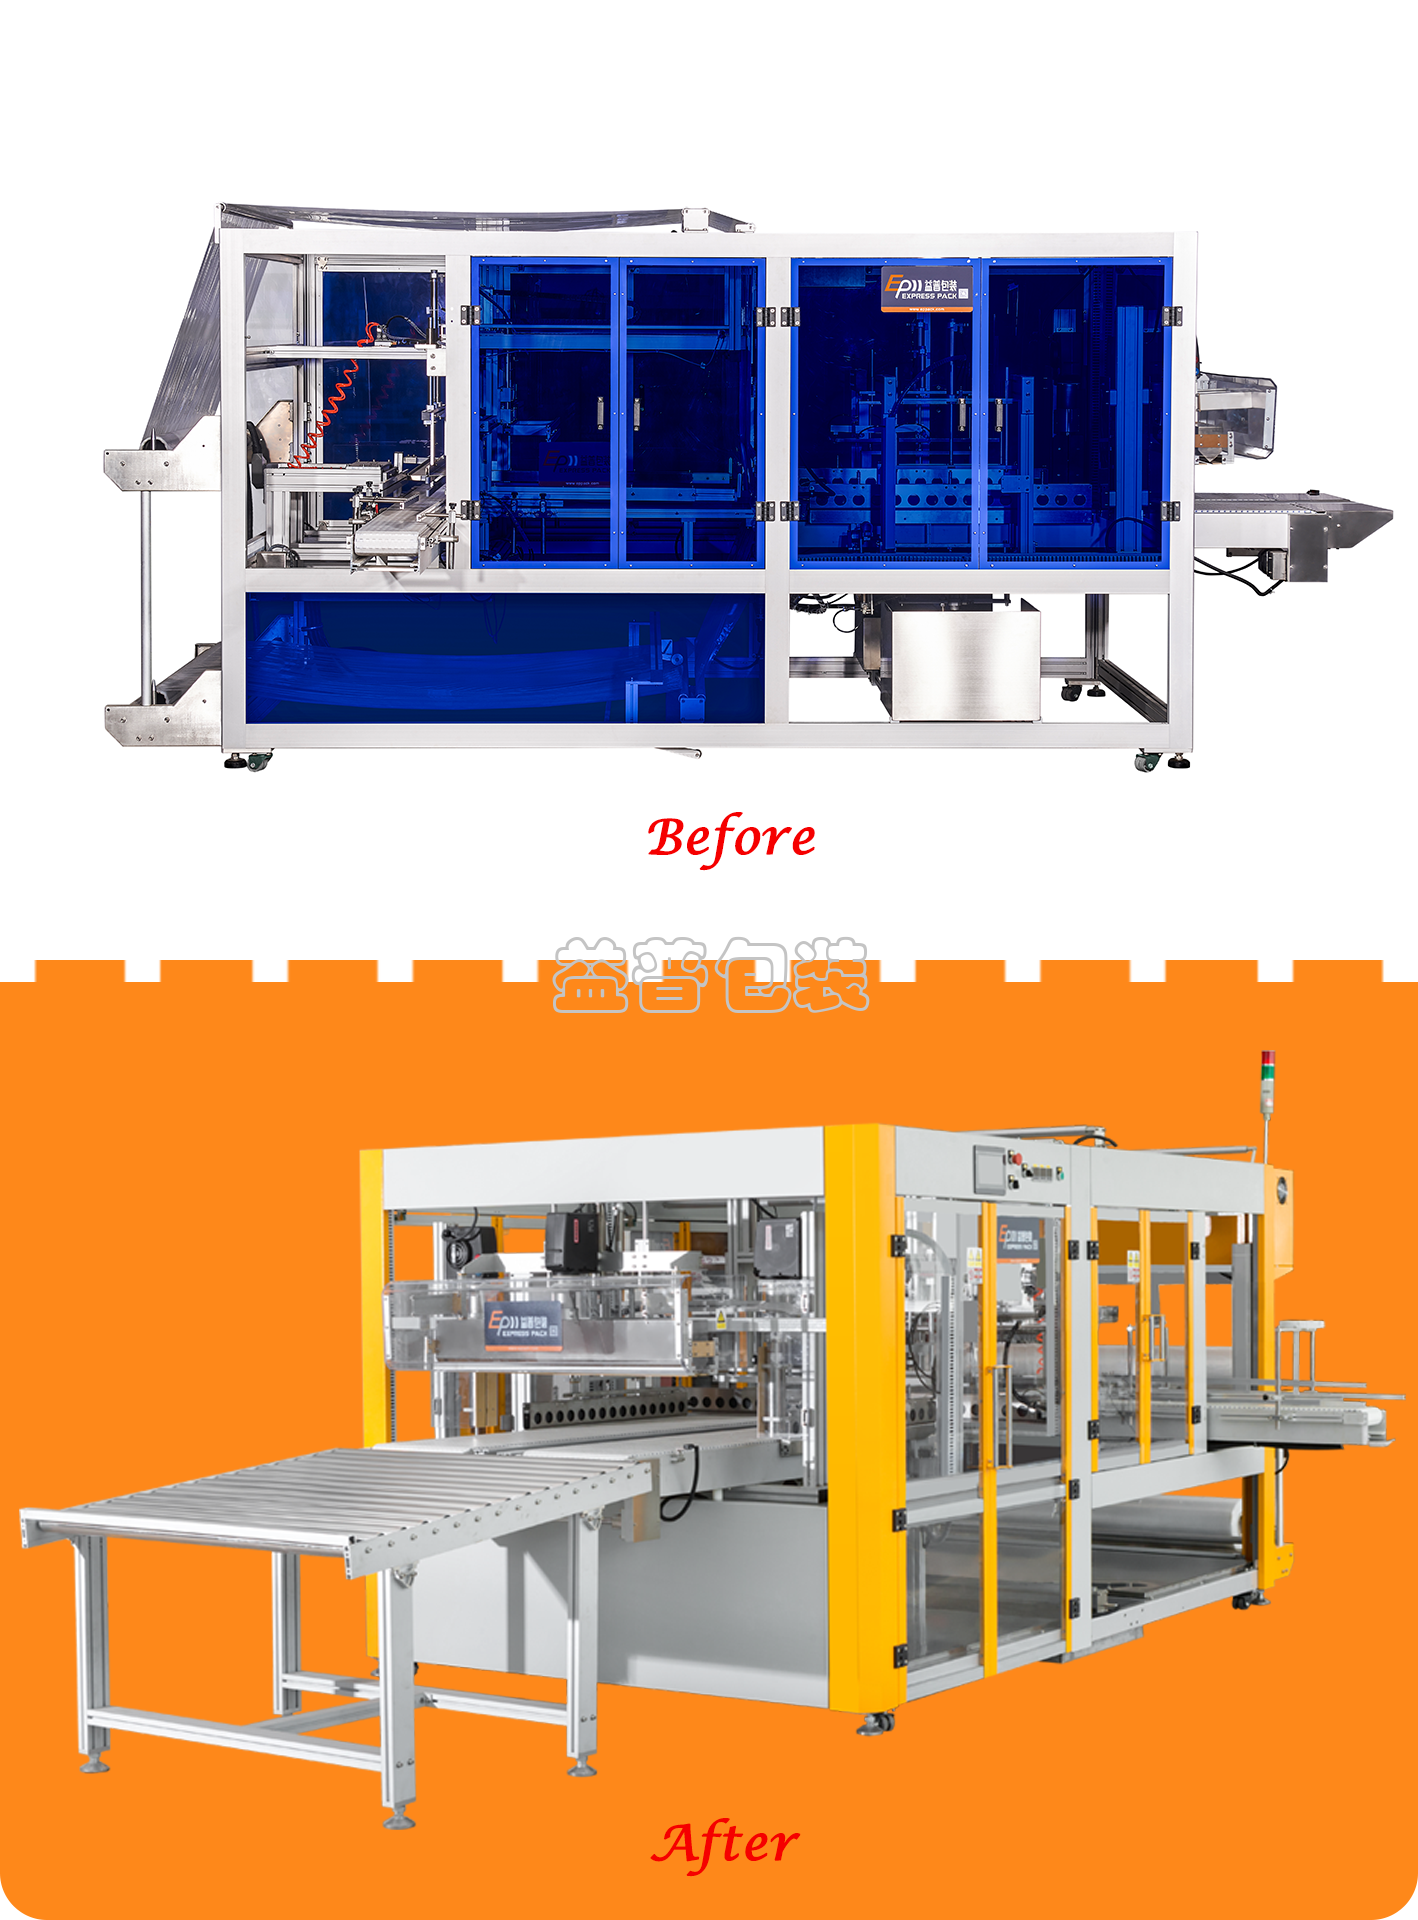 Automatic bottle packaging machine,Bottle palletizer ,Bottle leak tester,chain conveyor,Guangzhou packing and conveying Manufacturer,chain continuous lifter,roller conveyor